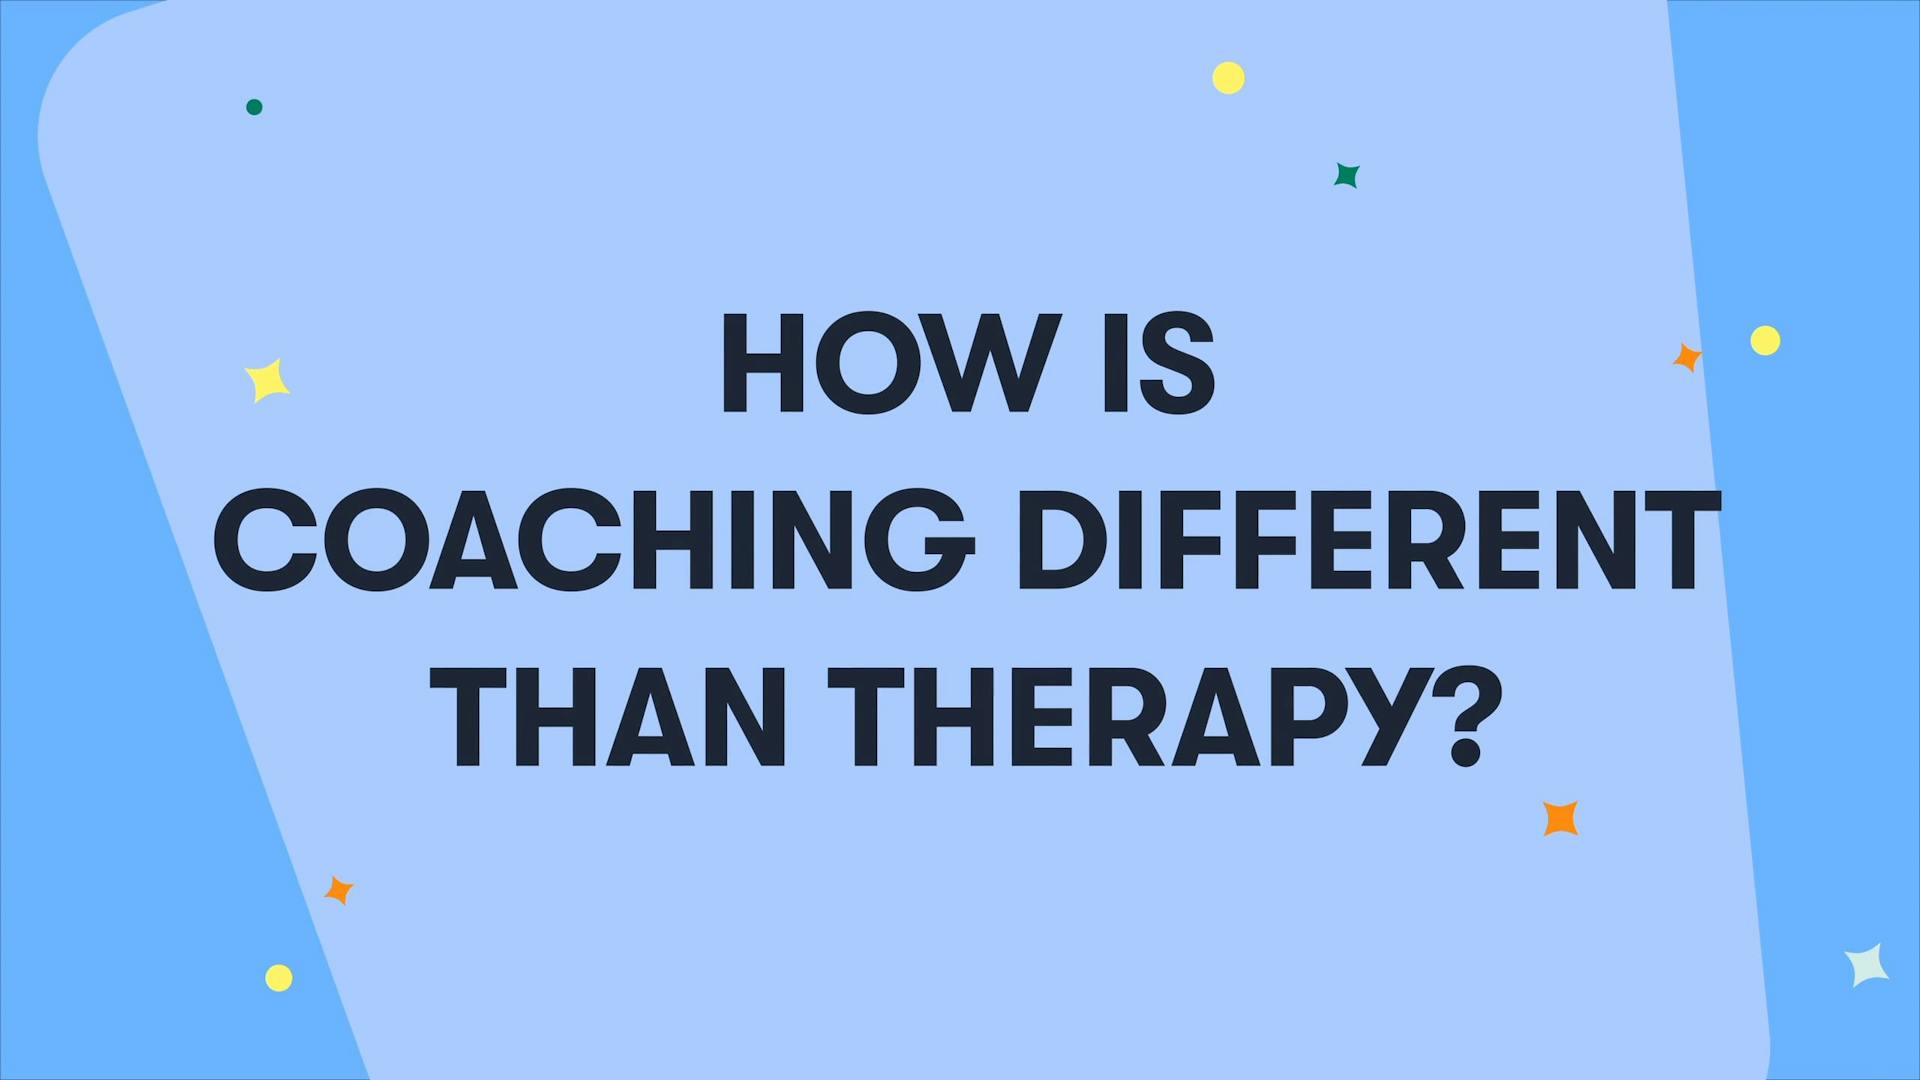 A Brightline experience: How is coaching different than therapy?